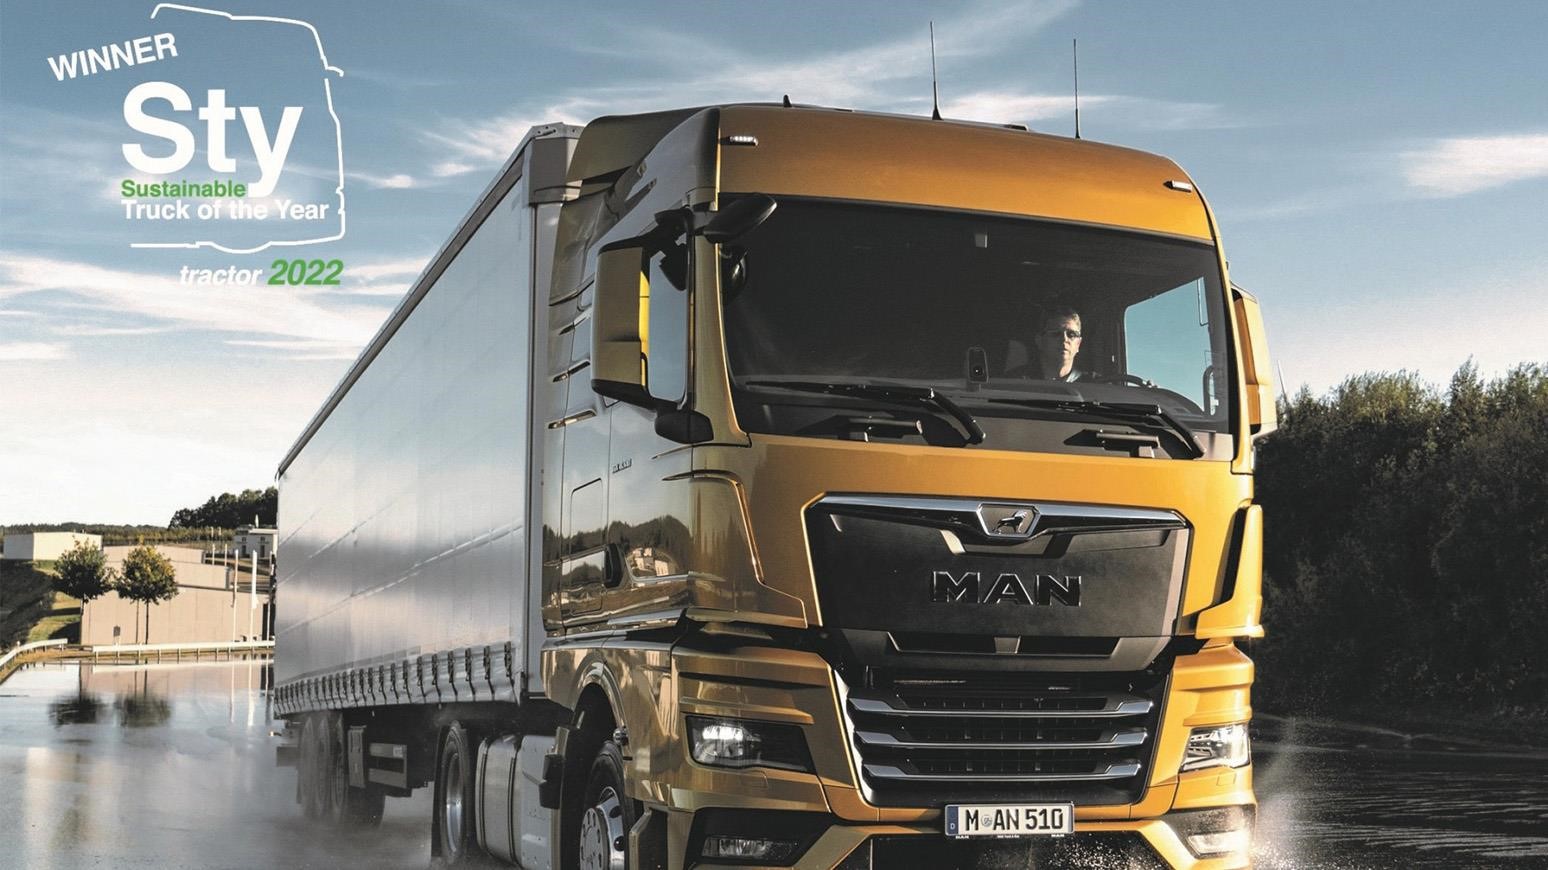 MAN TGX 18.510 Wins Sustainable Truck Of The Year 2022